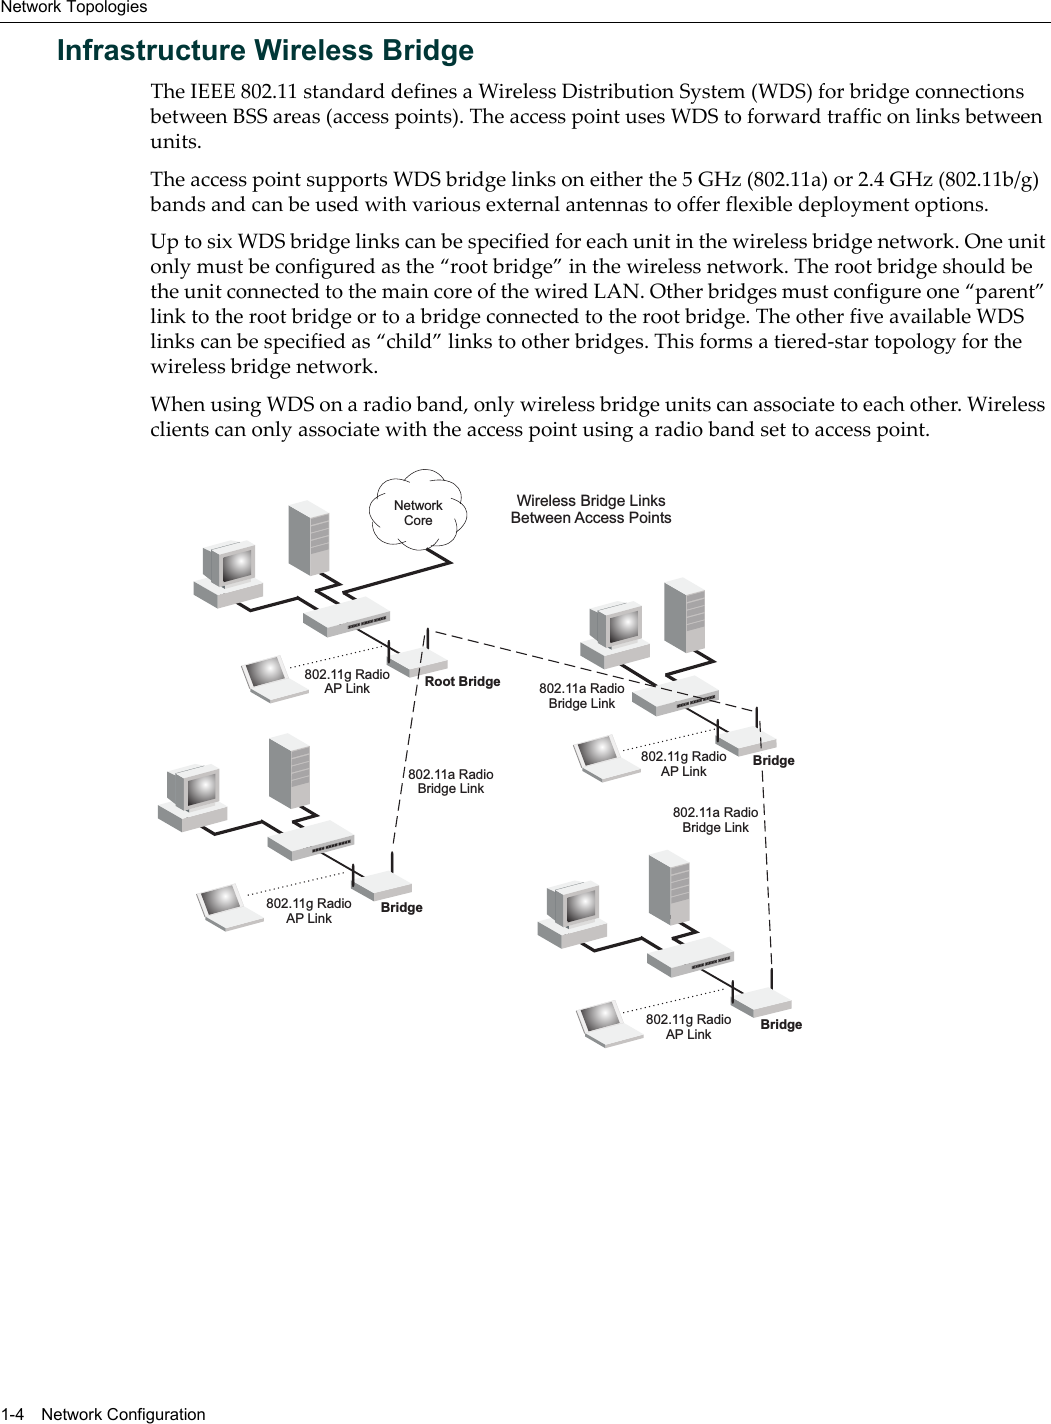 Network Topologies1-4 Network ConfigurationInfrastructure Wireless BridgeTheIEEE802.11standarddefinesaWirelessDistributionSystem(WDS)forbridgeconnectionsbetweenBSSareas(accesspoints).TheaccesspointusesWDStoforwardtrafficonlinksbetweenunits.TheaccesspointsupportsWDSbridgelinksoneitherthe5GHz(802.11a)or2.4 GHz(802.11b/g)bandsandcanbeusedwithvariousexternalantennastoofferflexibledeploymentoptions.UptosixWDSbridgelinkscanbespecifiedforeachunitinthewirelessbridgenetwork.Oneunitonlymustbeconfiguredasthe“rootbridge”inthewirelessnetwork.TherootbridgeshouldbetheunitconnectedtothemaincoreofthewiredLAN.Otherbridgesmustconfigureone“parent”linktotherootbridgeortoabridgeconnectedtotherootbridge.TheotherfiveavailableWDSlinkscanbespecifiedas“child”linkstootherbridges.Thisformsatiered‐startopologyforthewirelessbridgenetwork.WhenusingWDSonaradioband,onlywirelessbridgeunitscanassociatetoeachother.Wirelessclientscanonlyassociatewiththeaccesspointusingaradiobandsettoaccesspoint.Wireless Bridge LinksBetween Access Points802.11a RadioBridge Link802.11g RadioAP Link 802.11a RadioBridge Link802.11g RadioAP Link802.11g RadioAP LinkRoot BridgeBridge802.11a RadioBridge Link802.11g RadioAP Link BridgeBridgeNetworkCore